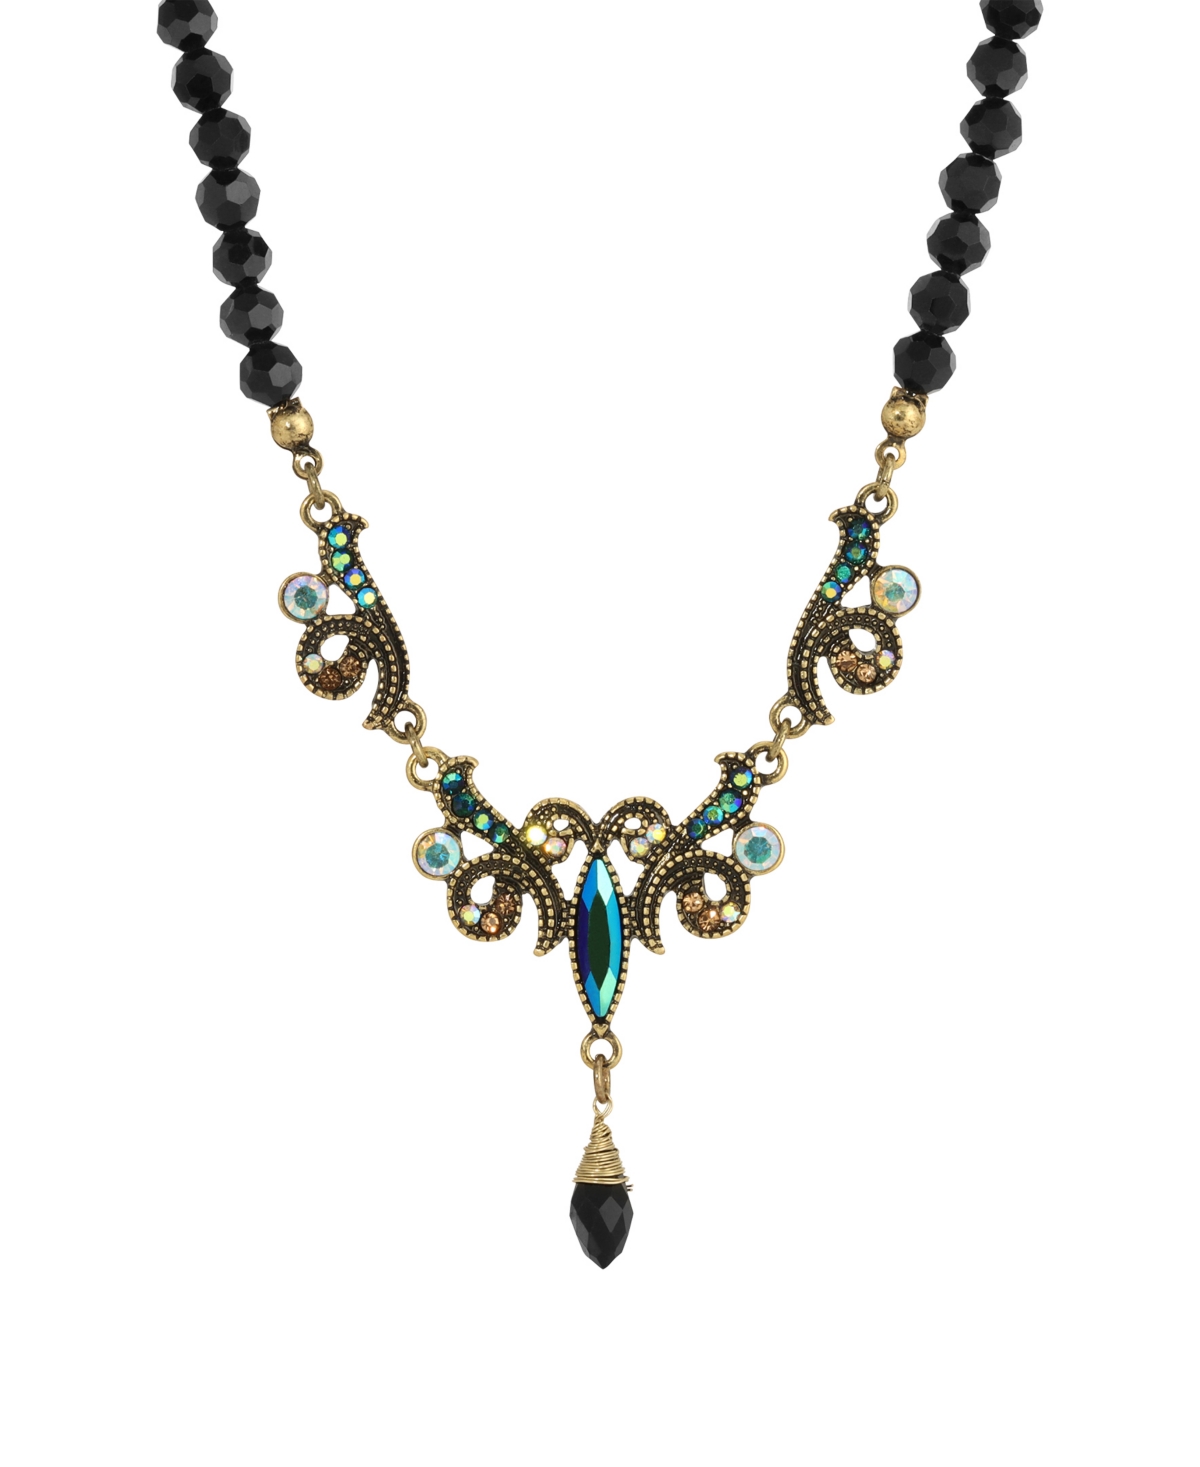 2028 Gold-tone Blue Iridescent Aurora Borealis Glass Stone And Jet Bead Necklace In Black